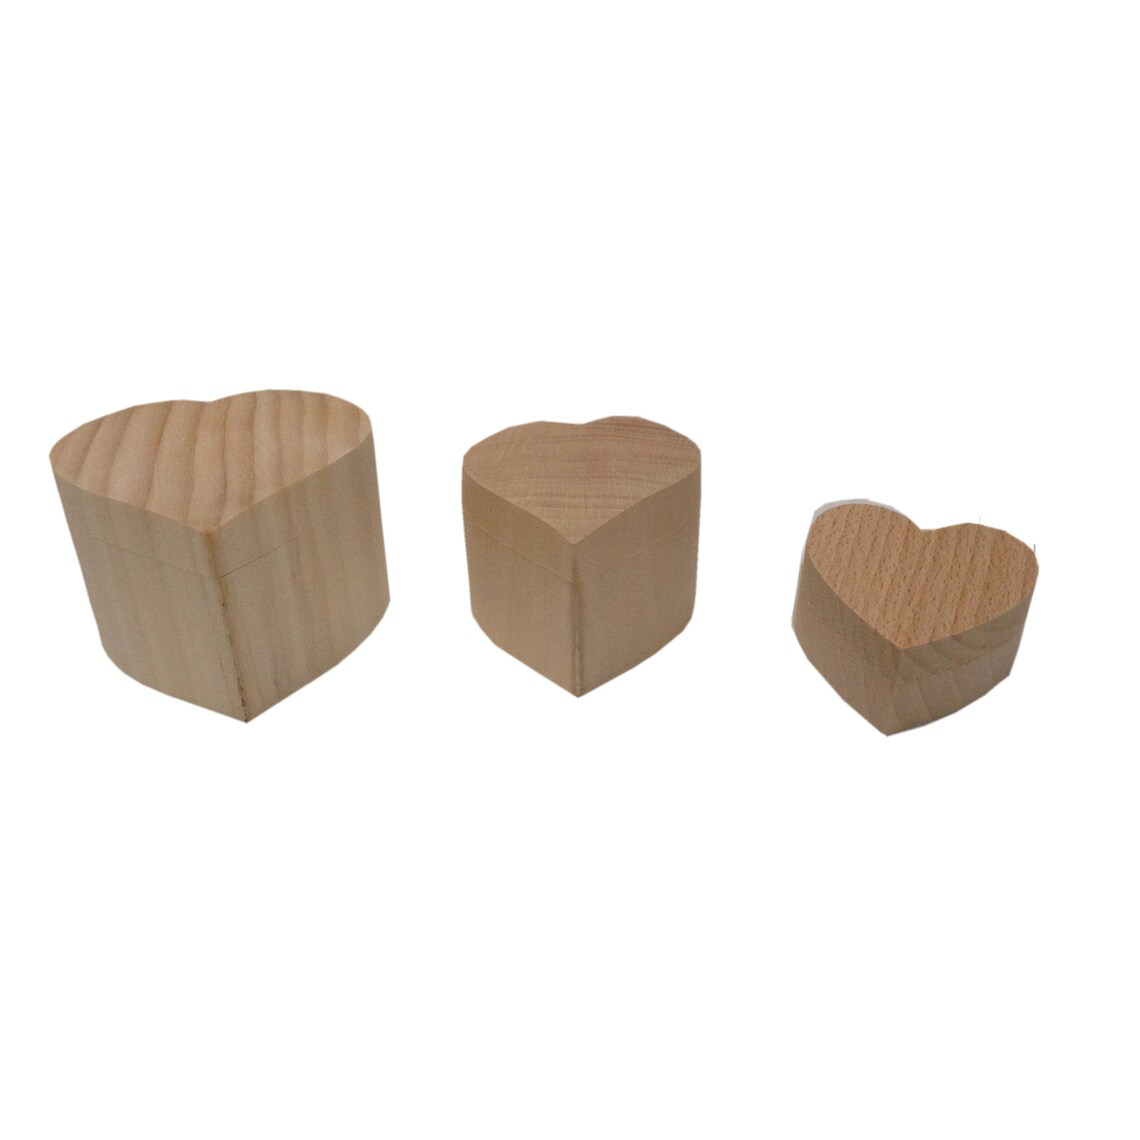 Heart Shaped Wooden Ring Box